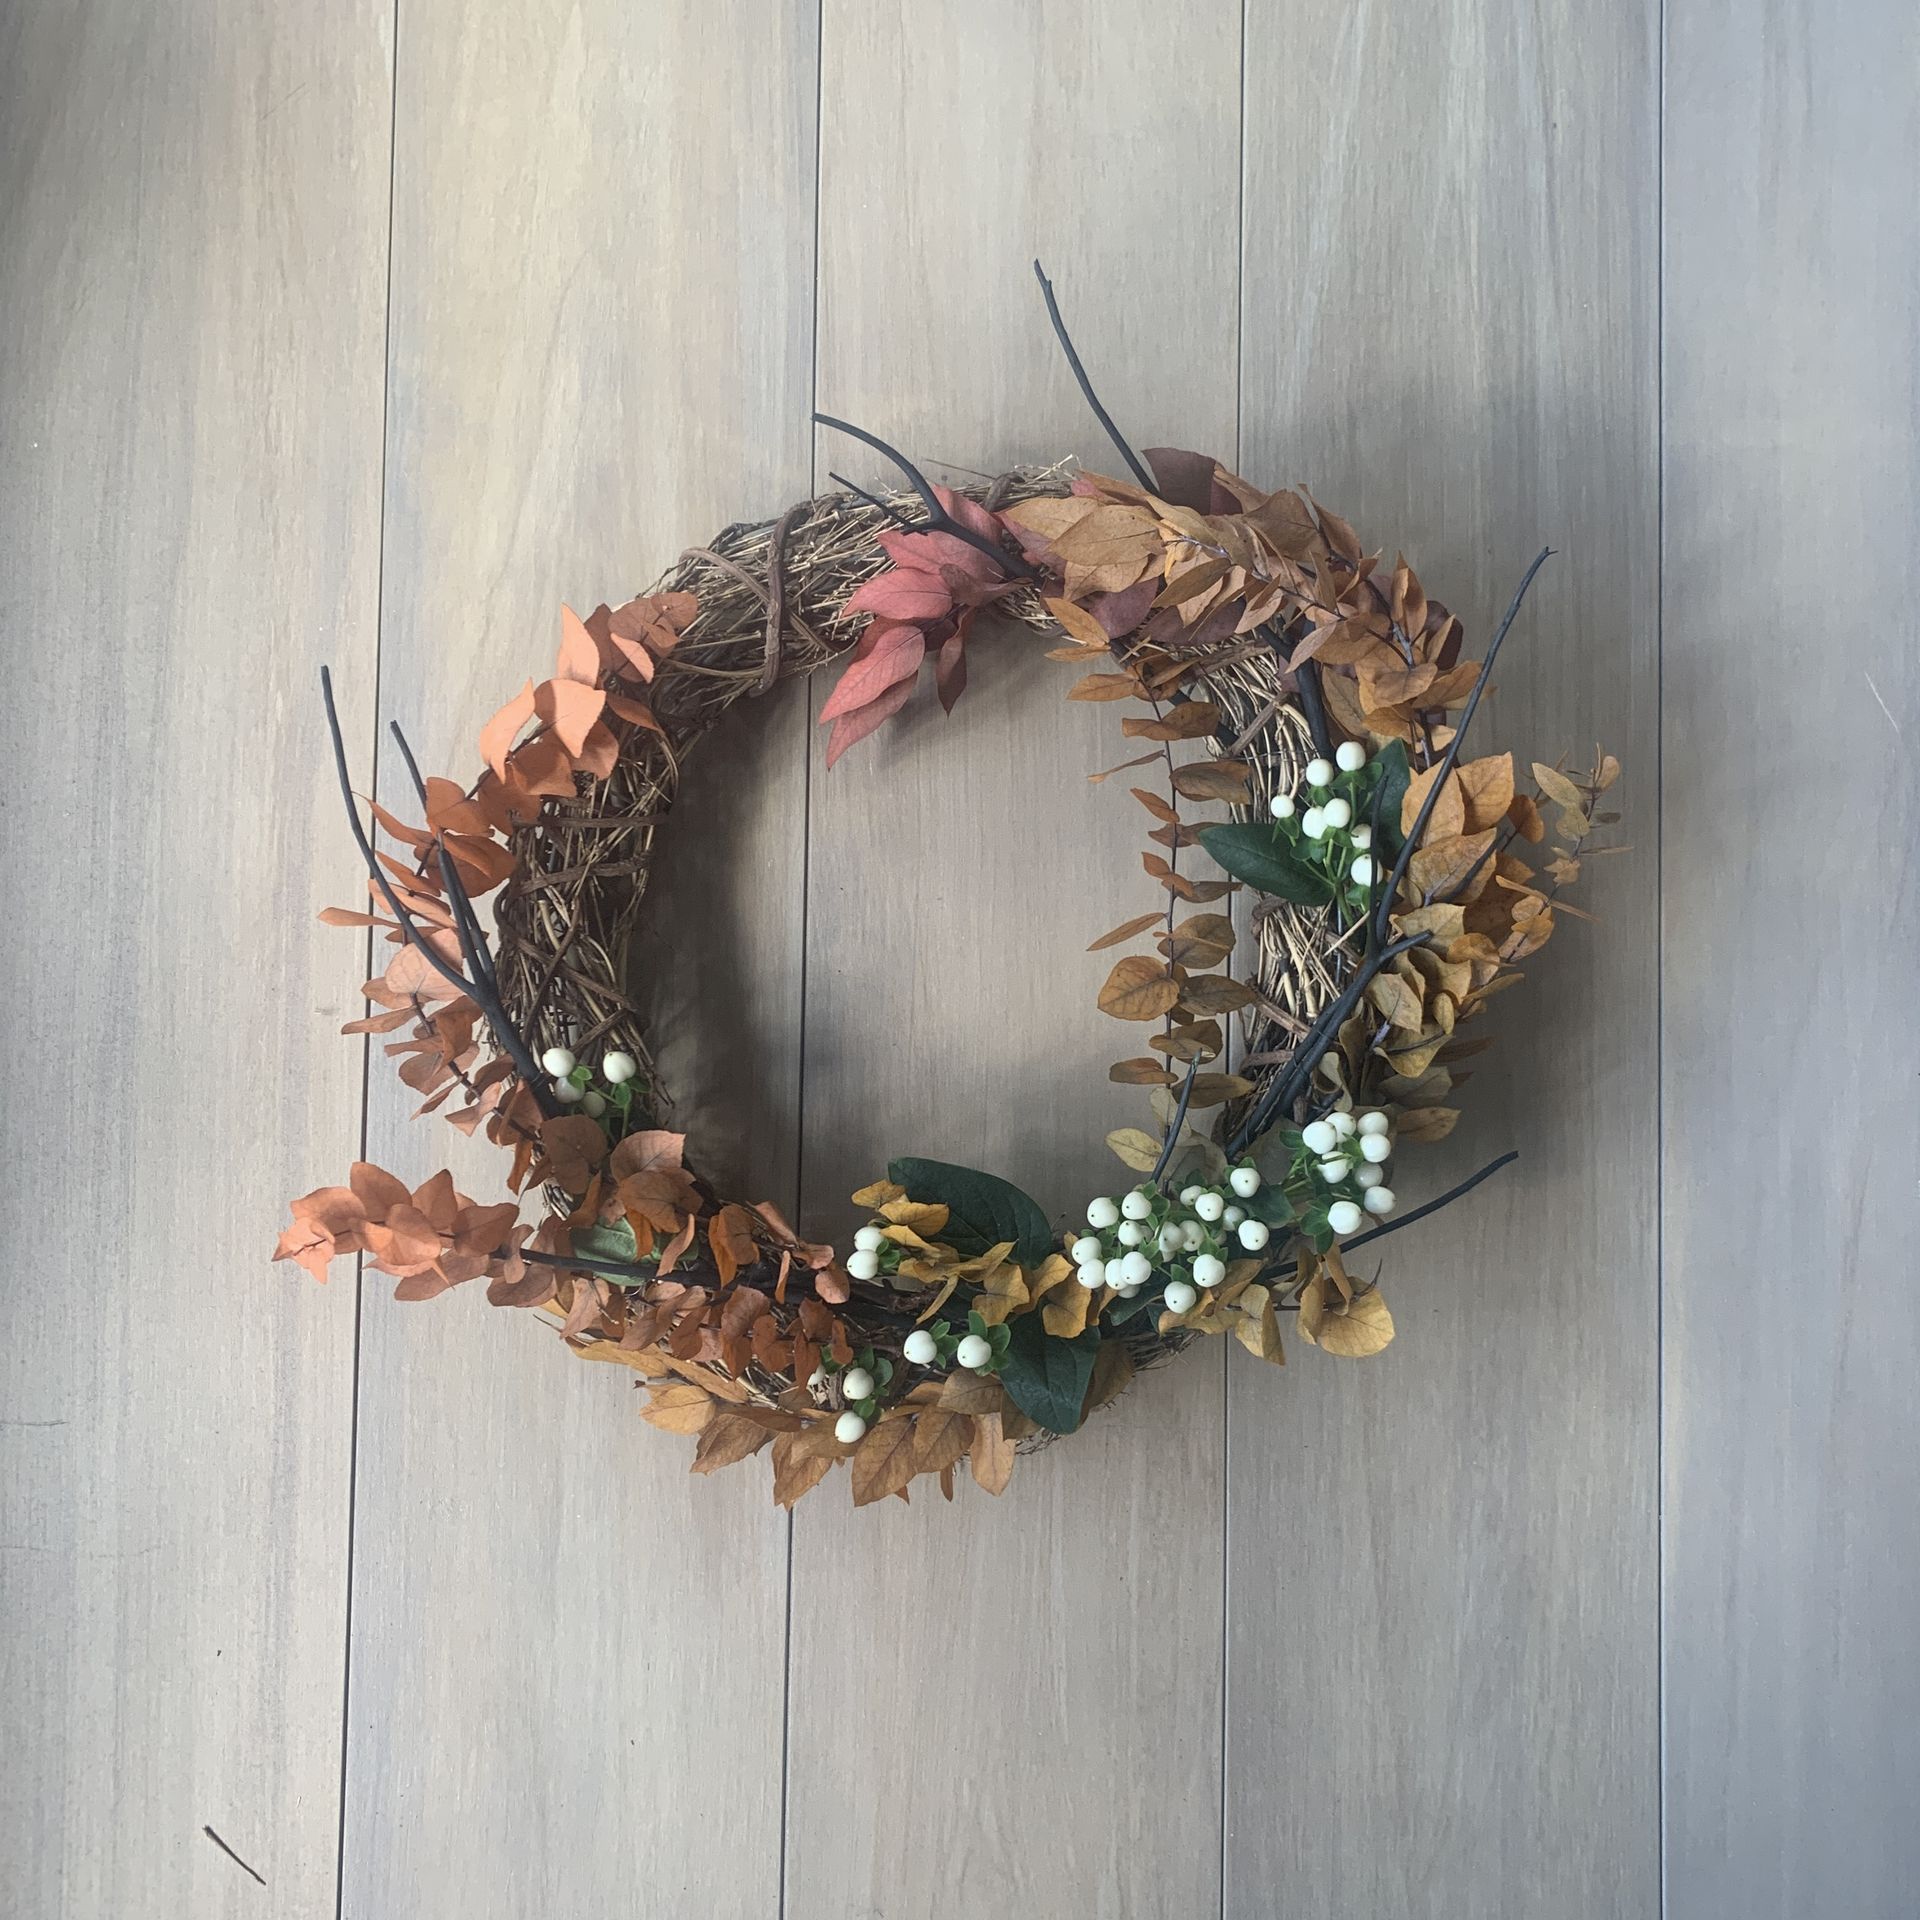 How to make a Halloween wreath: 6 speedy steps for beginners